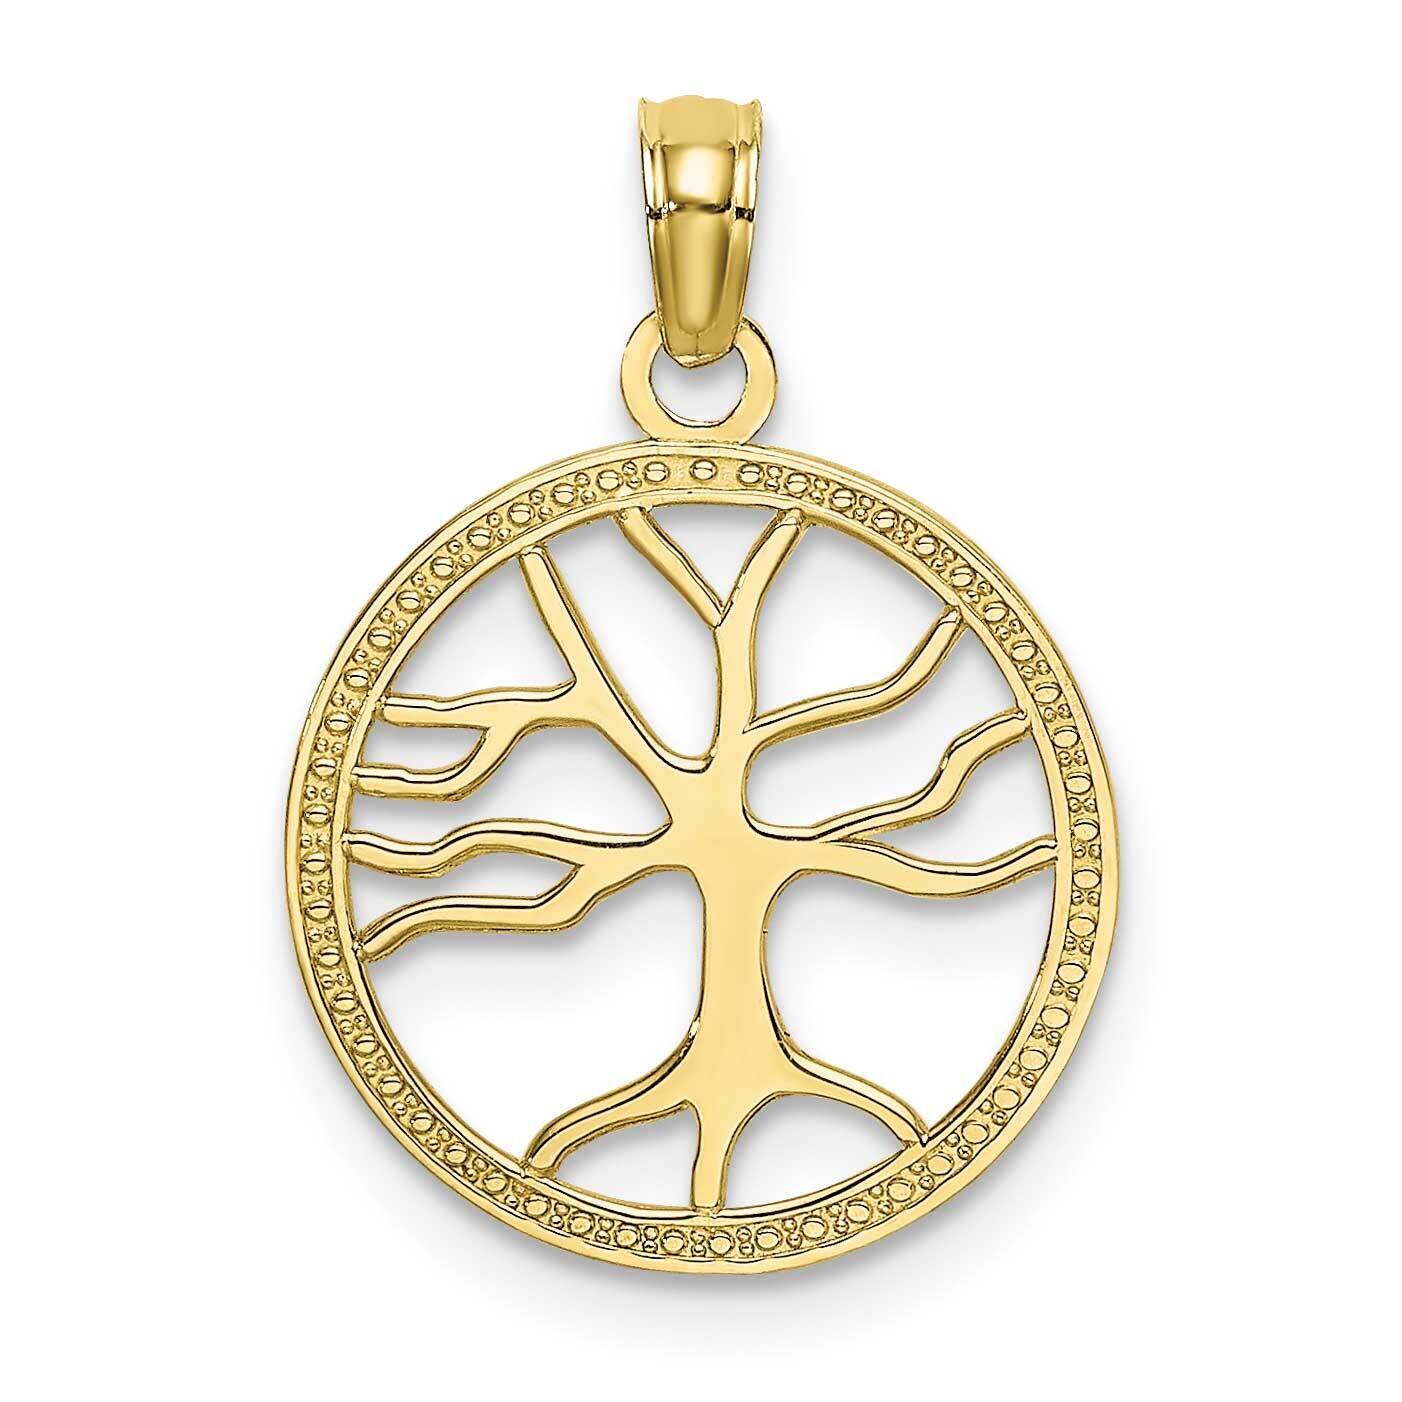 3-D Small Tree of Life In Round Frame Charm 10k Gold 10K7139